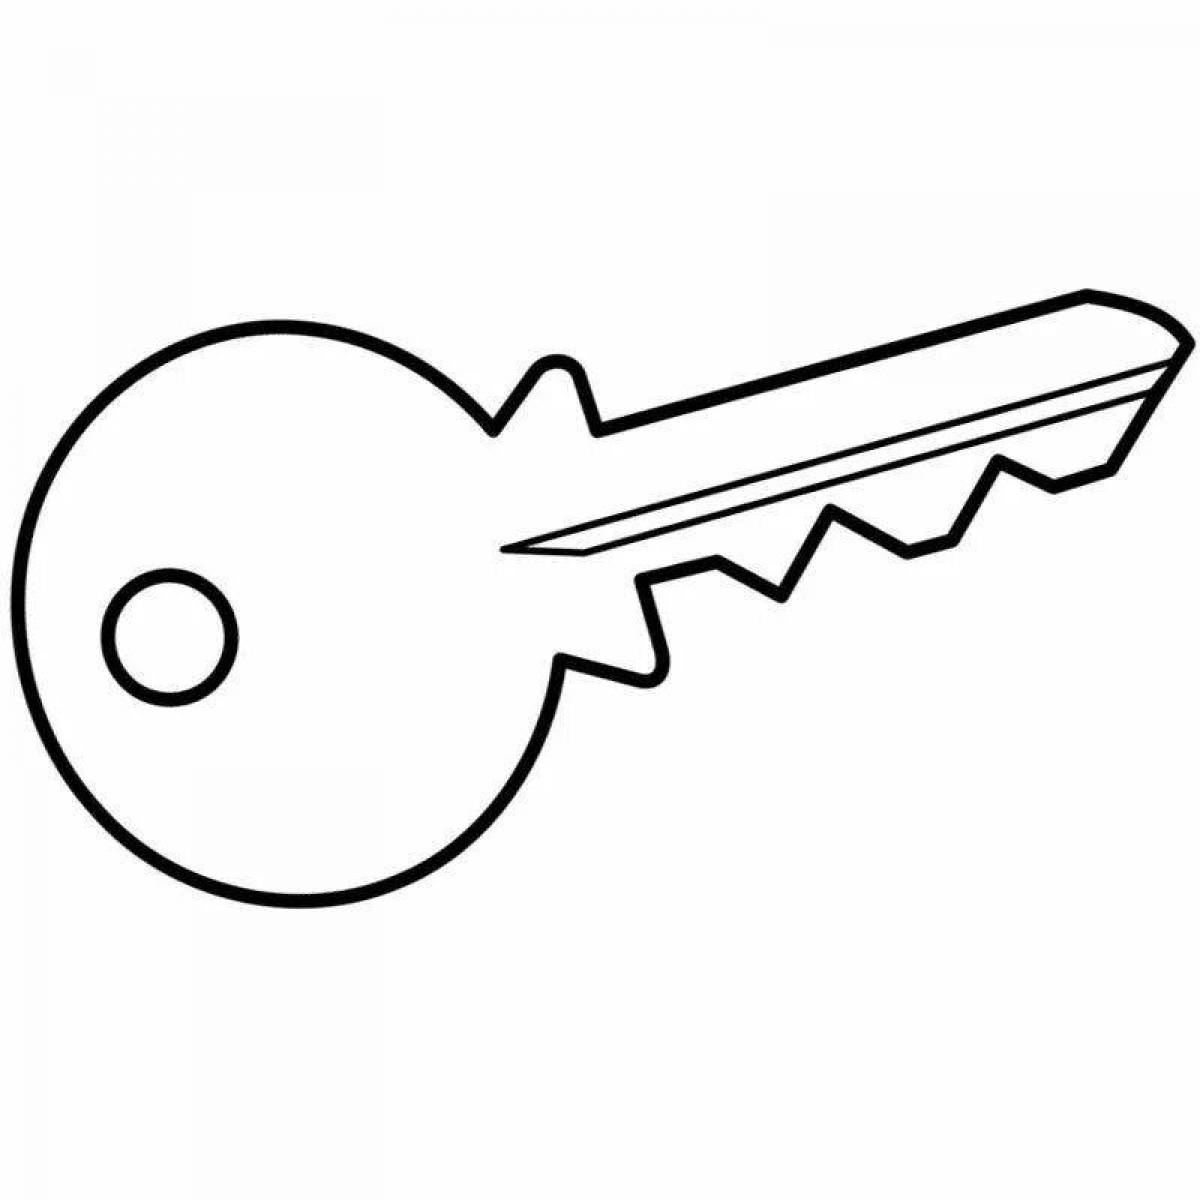 Colorful key coloring